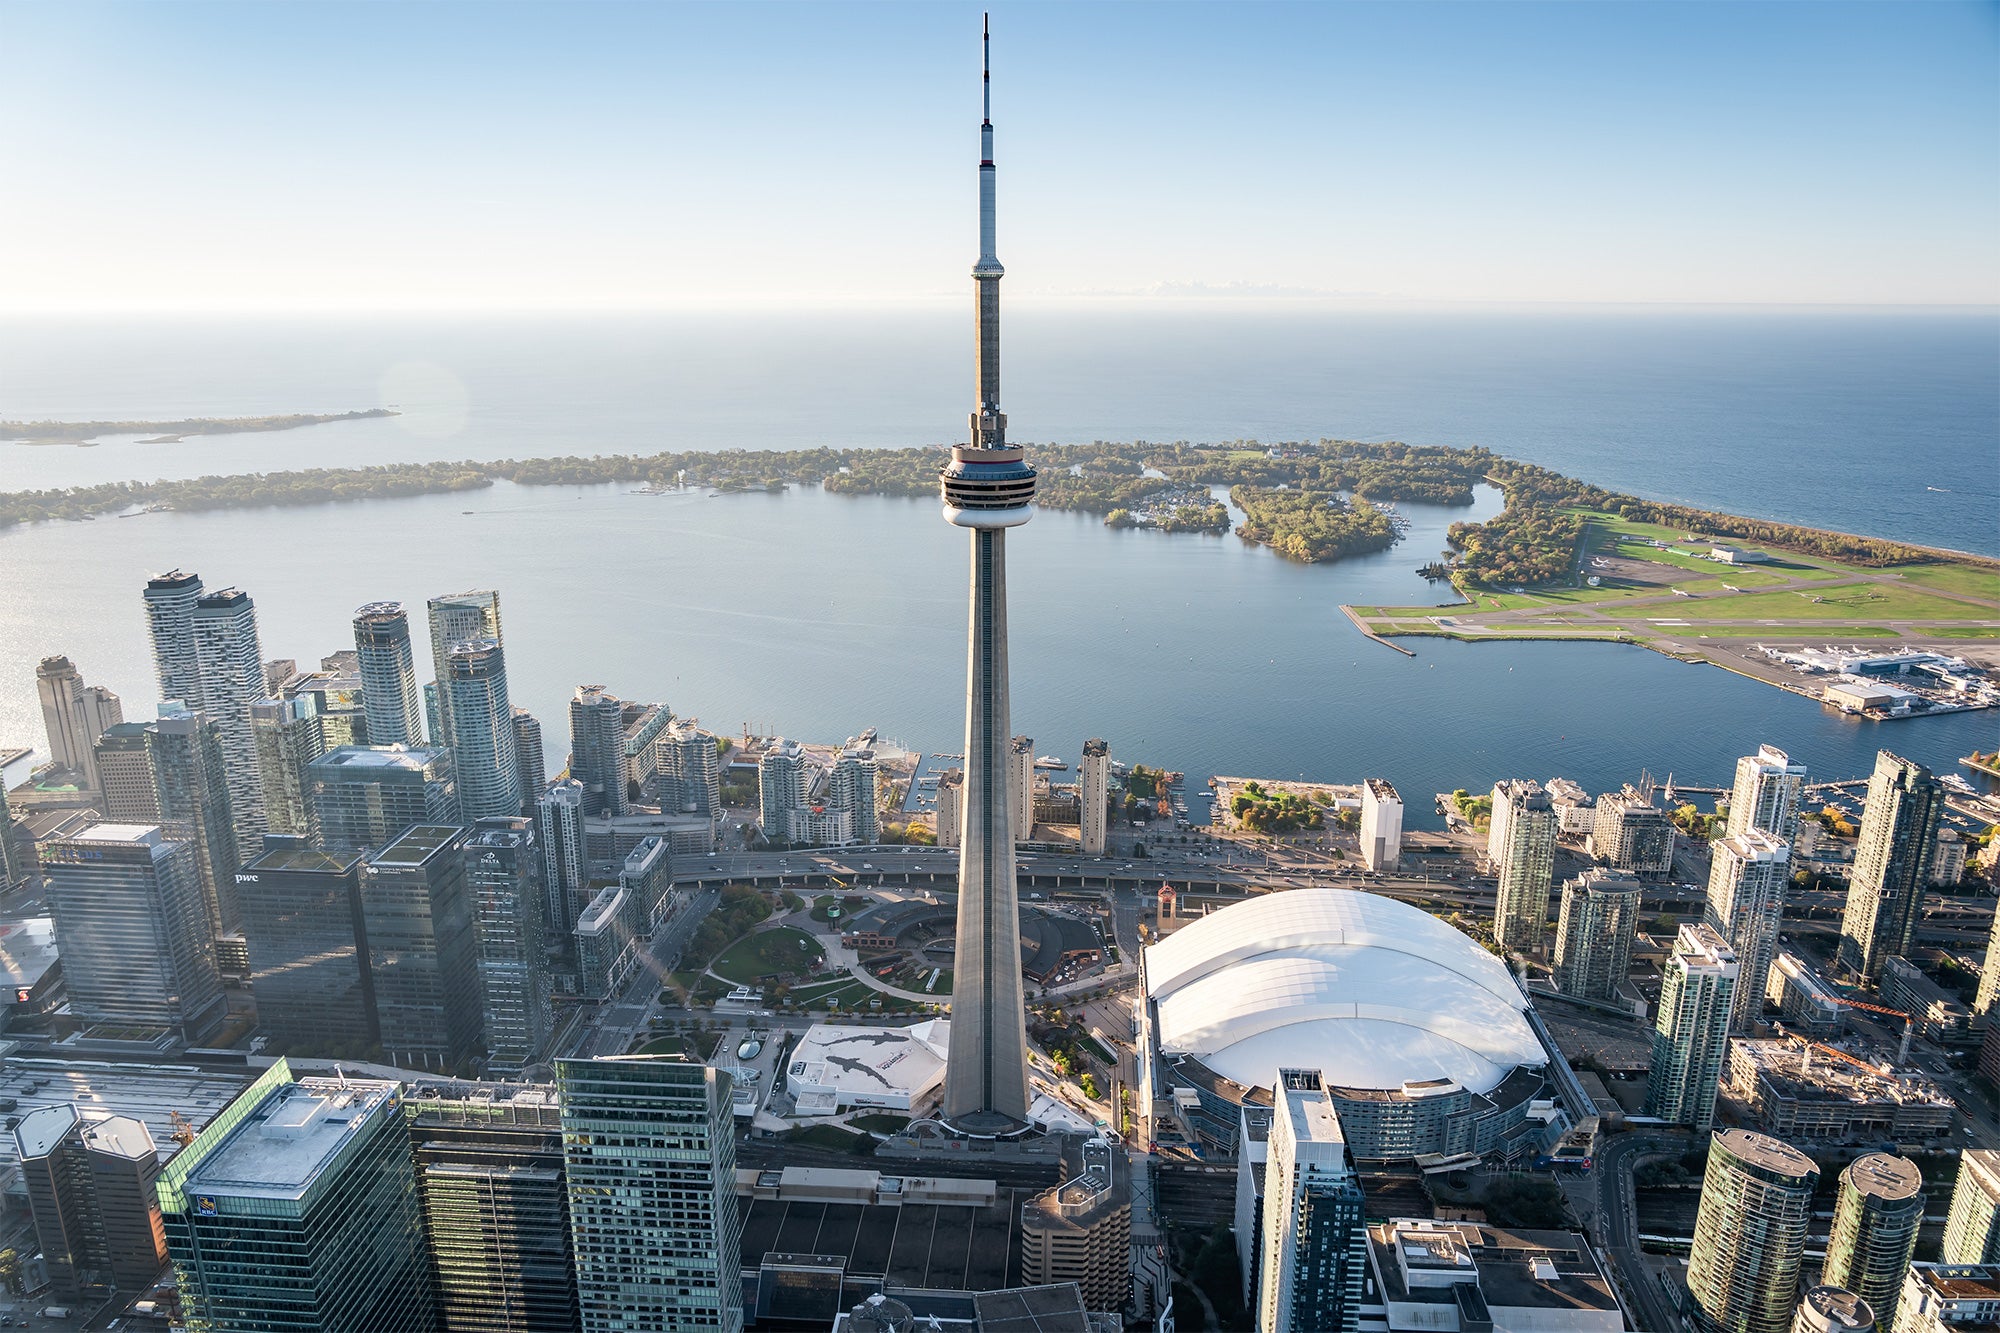 an aerial photo of the waterfront showing the CN Tower, buildings, and the Toronto Islands